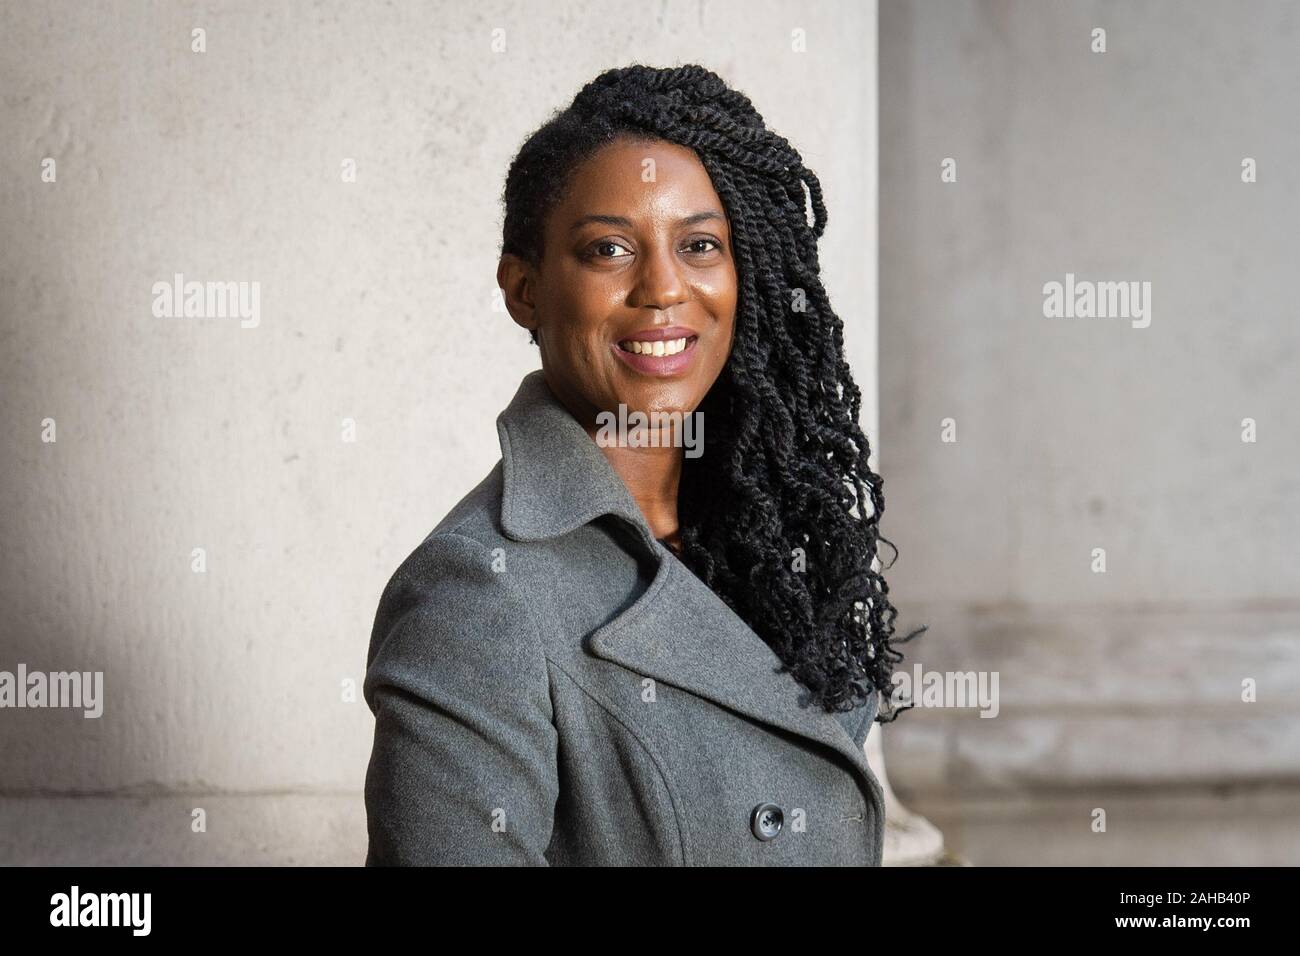 Yewande Akinola, who has been awarded an MBE for services to engineering innovation and diversity in science, engineering, technology and mathematics in the New Year's Honours List, at Admiralty House, London. Stock Photo